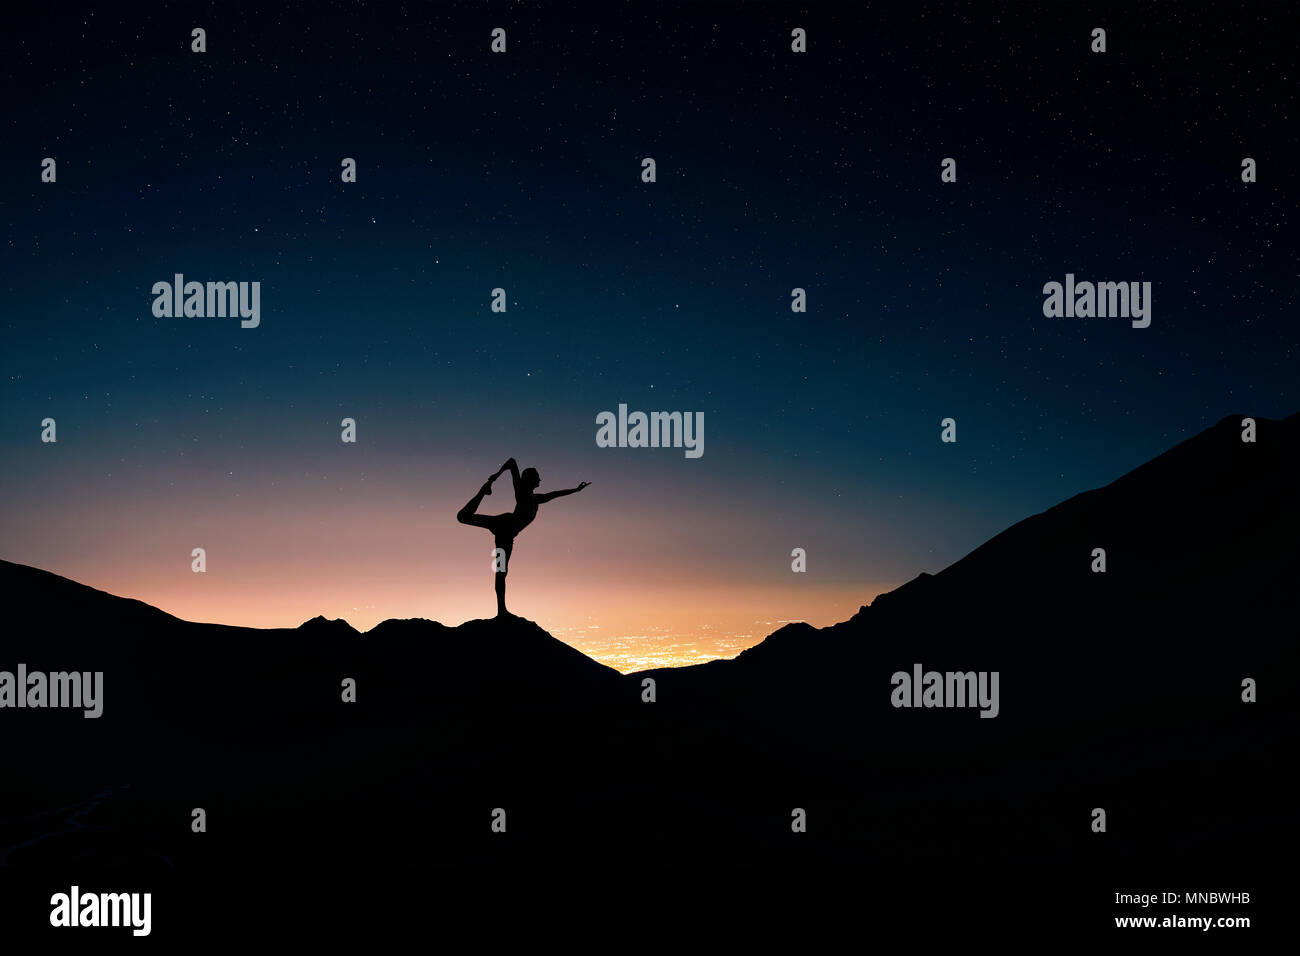 Fit Man in silhouette doing yoga natarajasana pose at night city and starry sky background Stock Photo